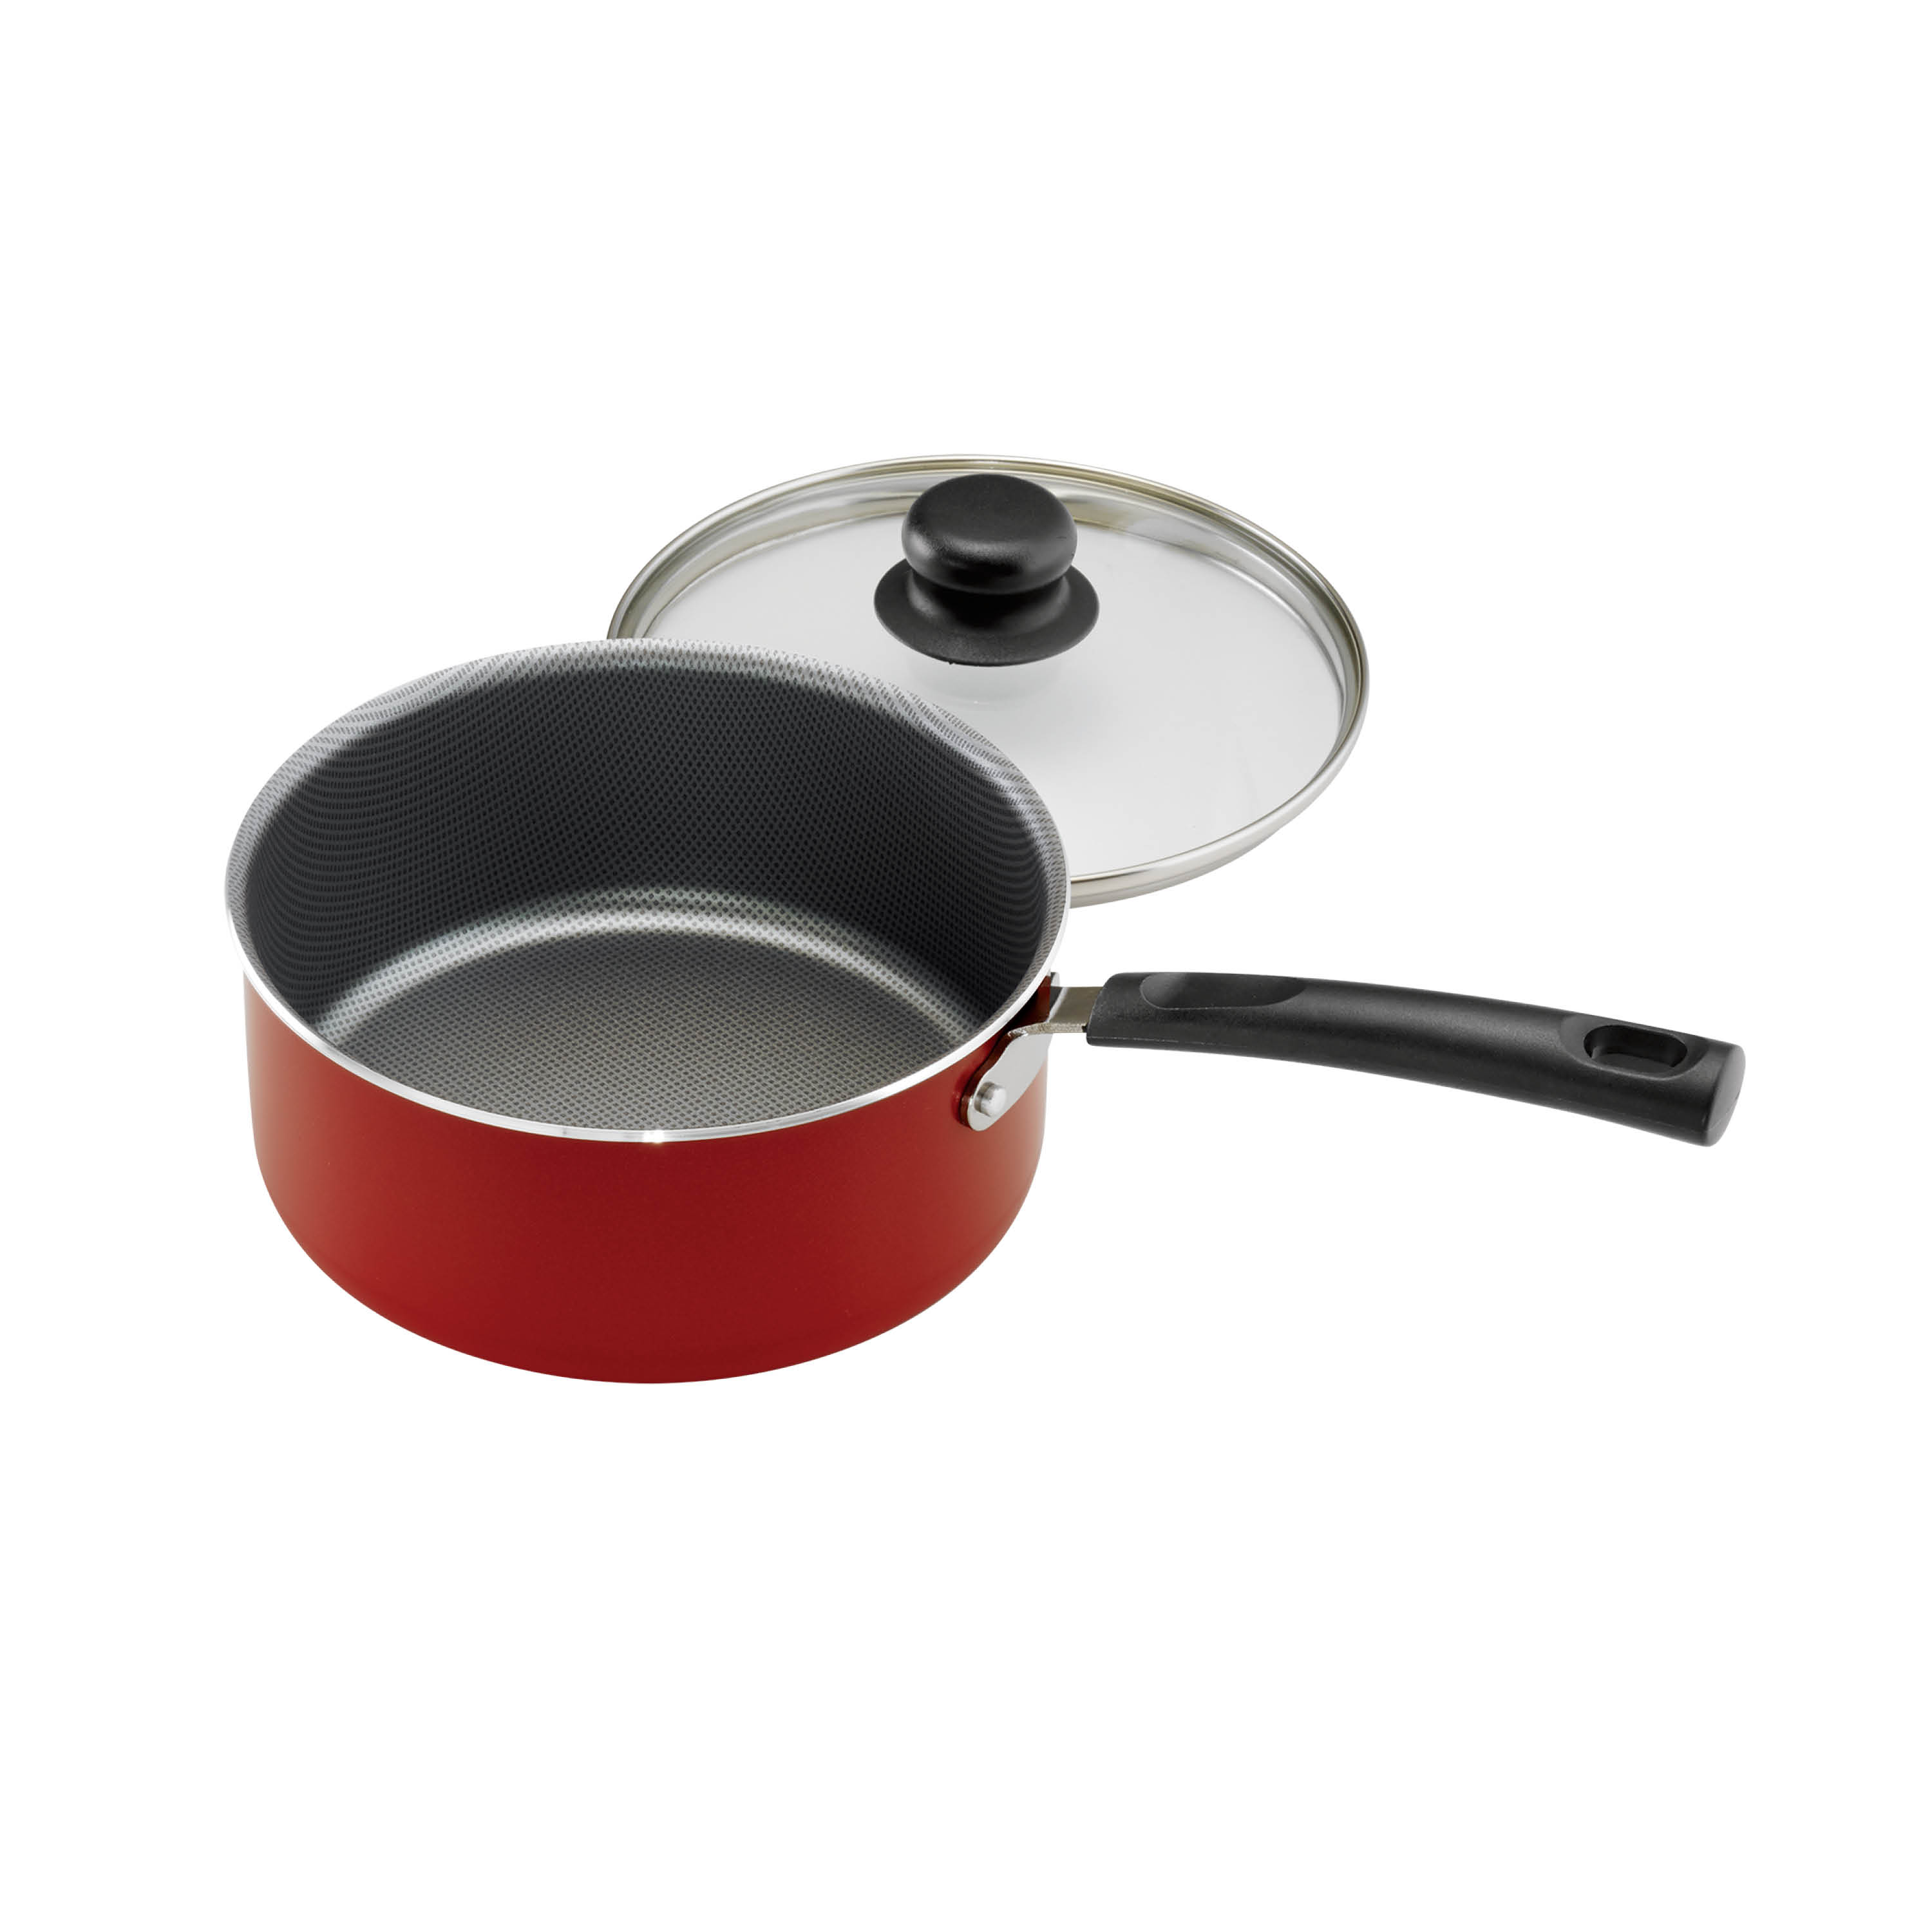 Tramontina Primaware 18 Piece Non-stick Cookware Set, Red - image 22 of 26